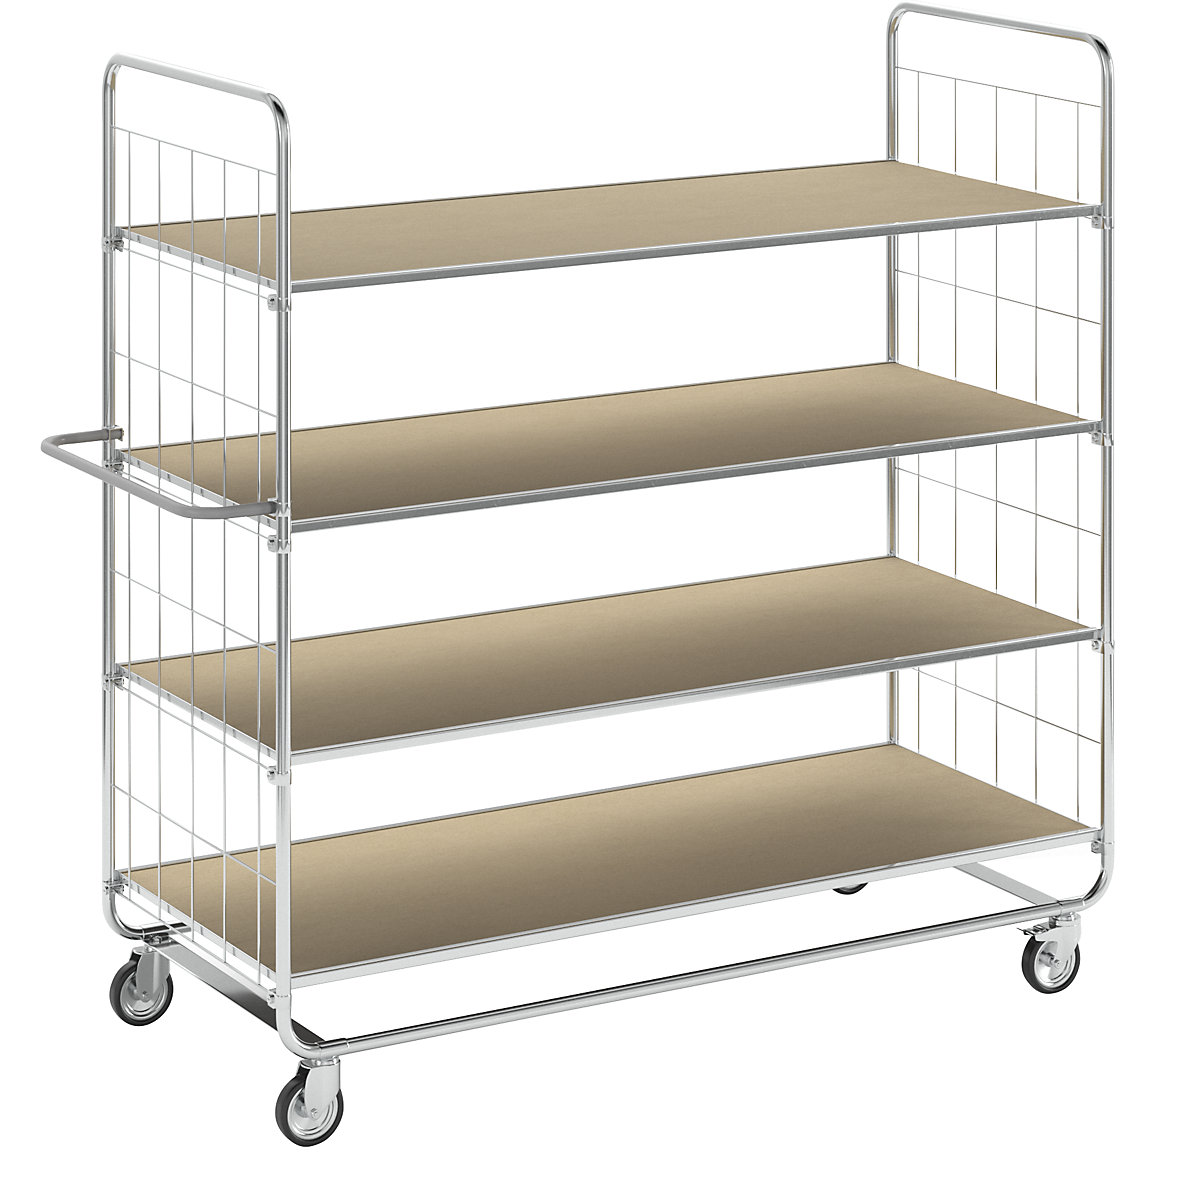 ESD shelf truck, with 4 shelves – Kongamek, 4 castors, 2 with stops, LxWxH 1195 x 470 x 1120 mm, 5+ items-15